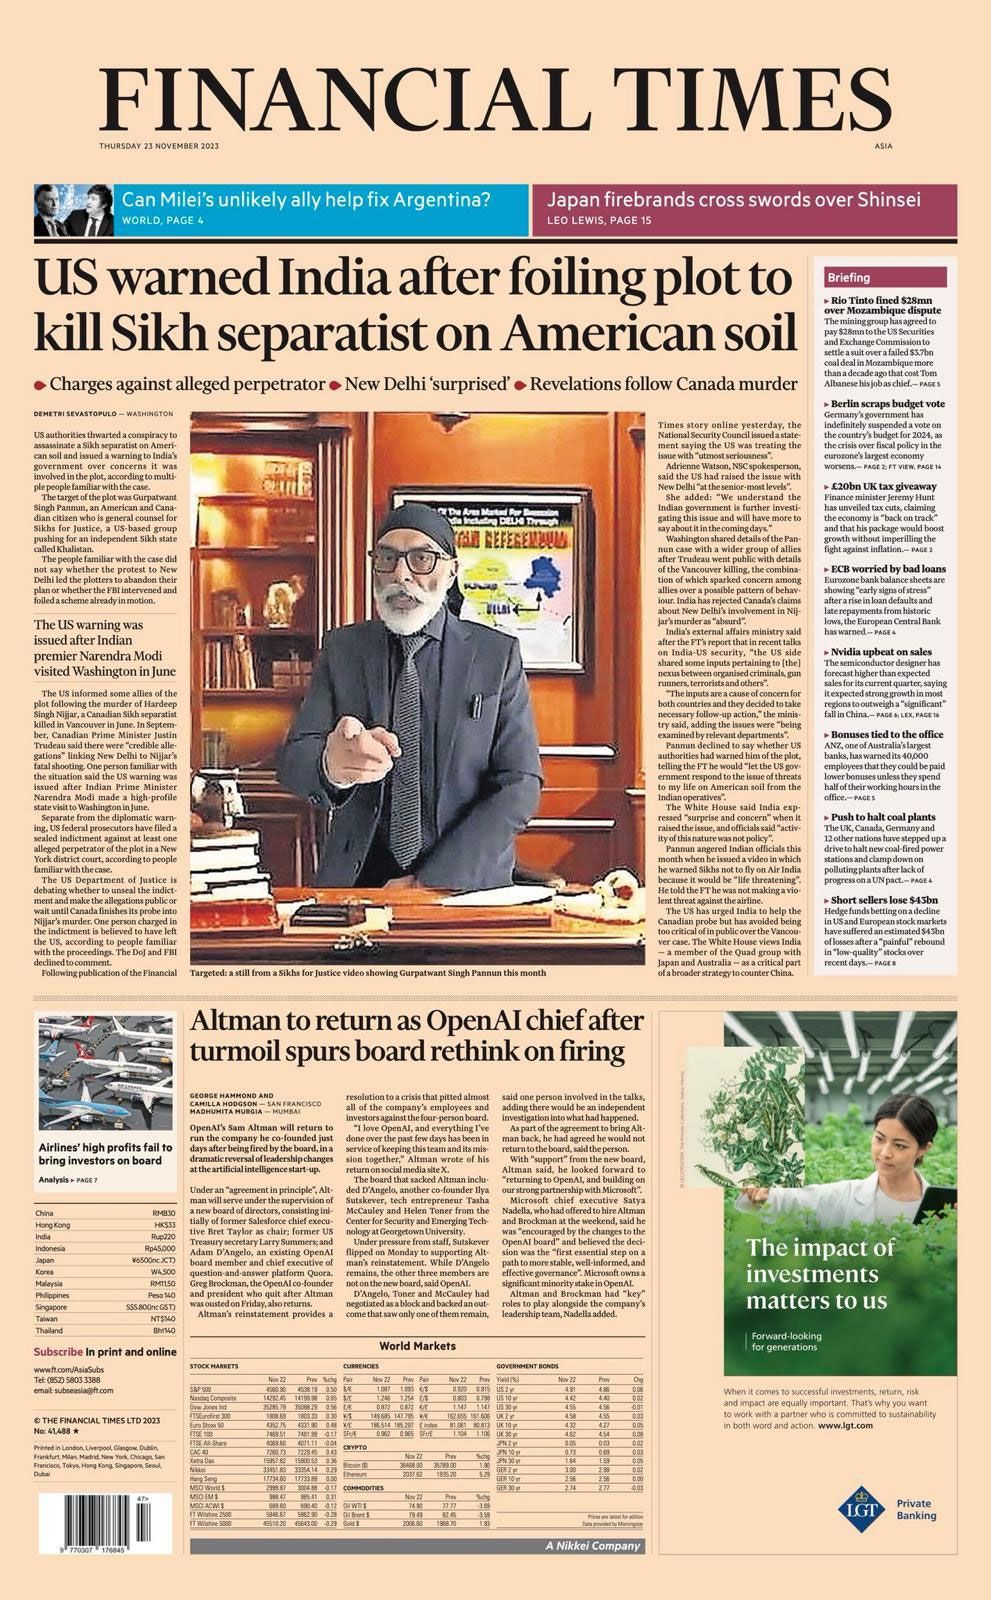 Copy of the Financial Times front page bearing Gurpatwant Singh Pannun report. — Provided by author